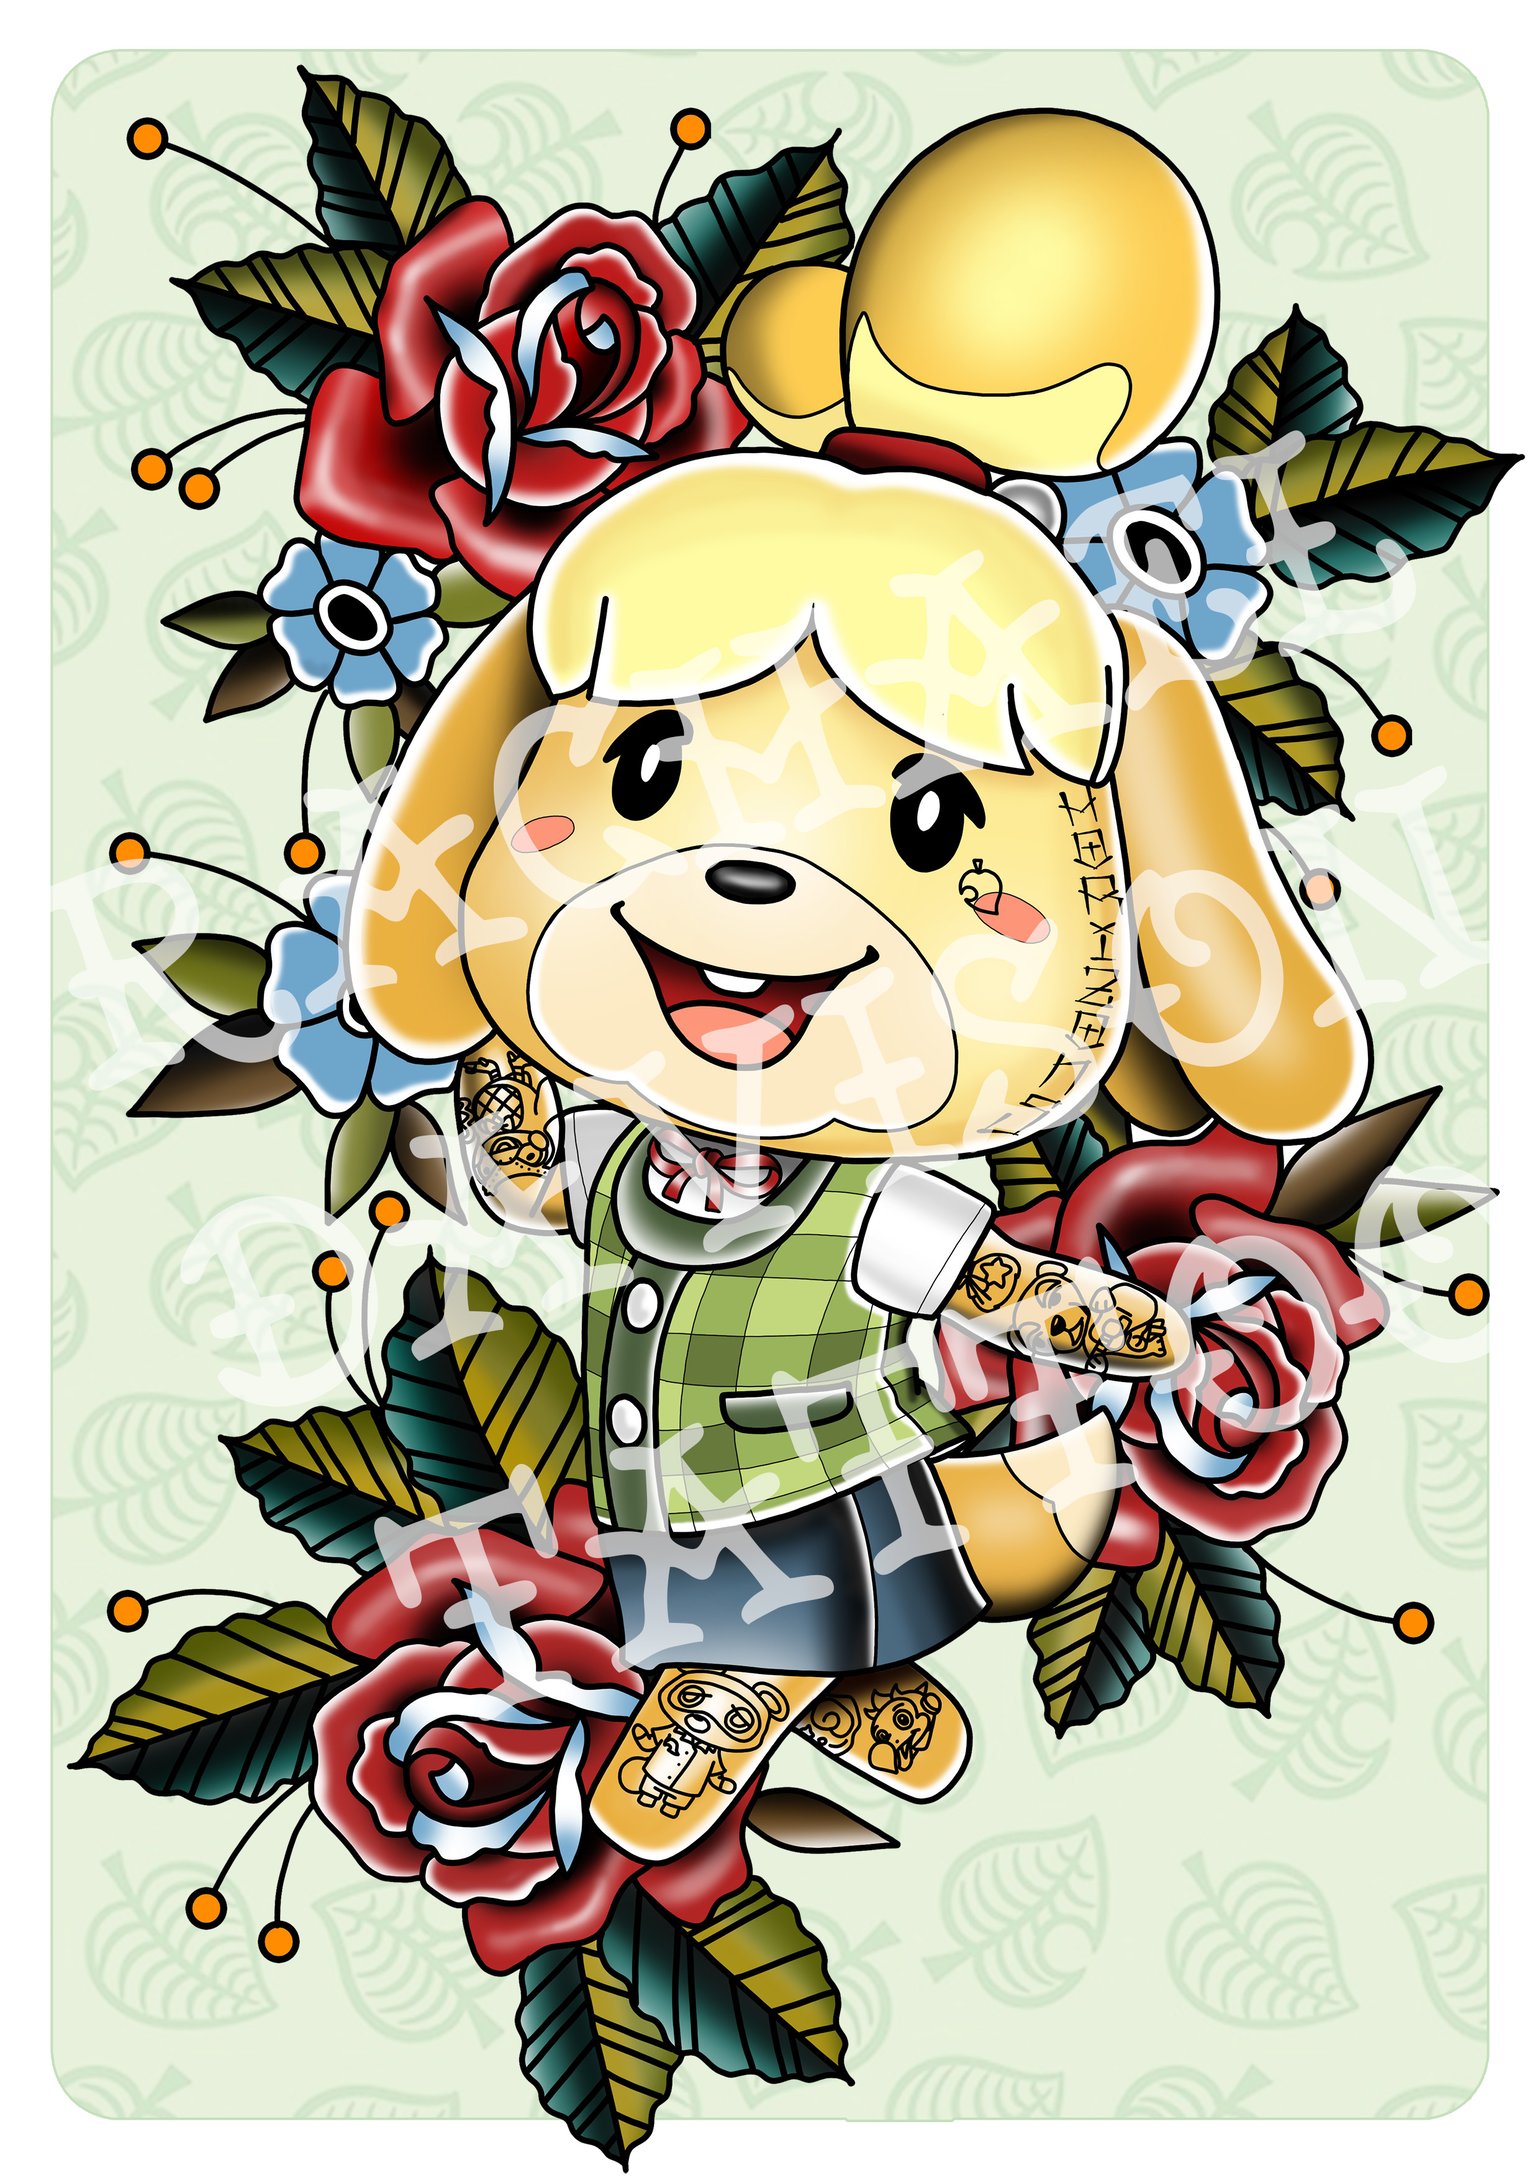 Image of Isabelle animal crossing